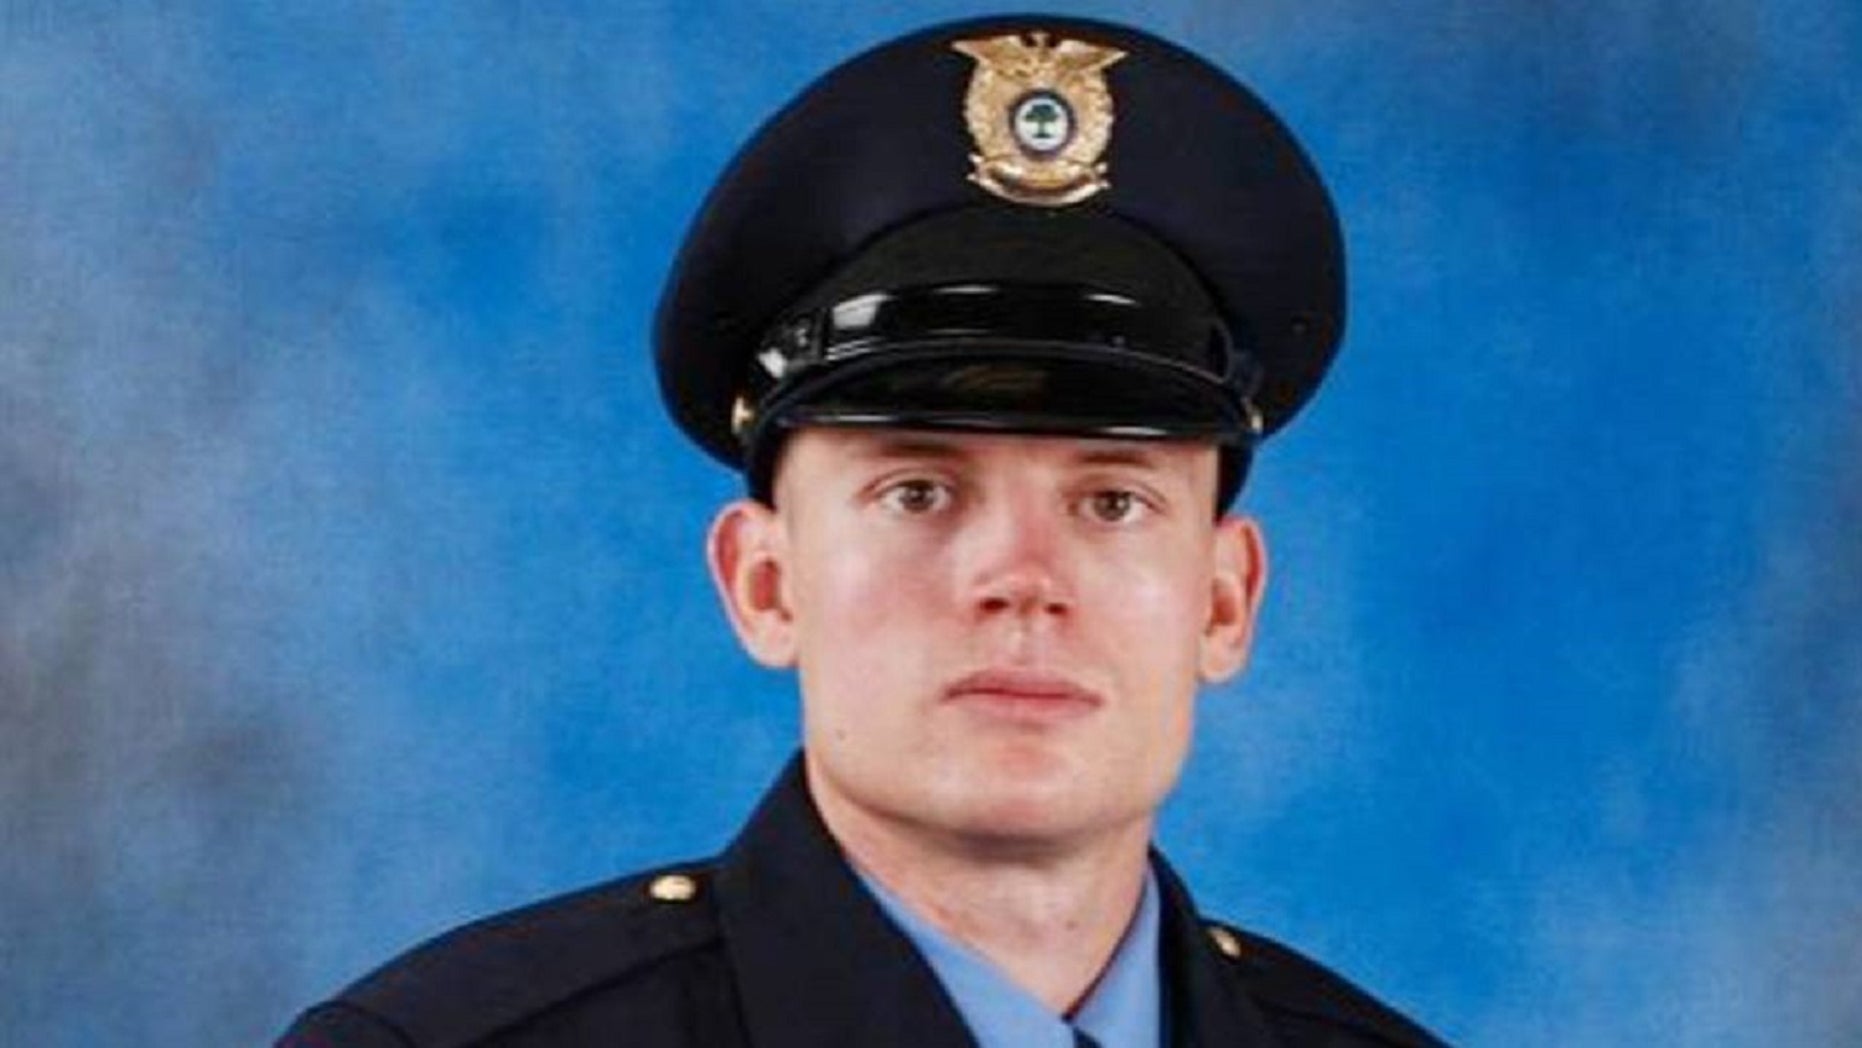 Raleigh cop, now fighting for his life, was shot multiple times at close range, report says